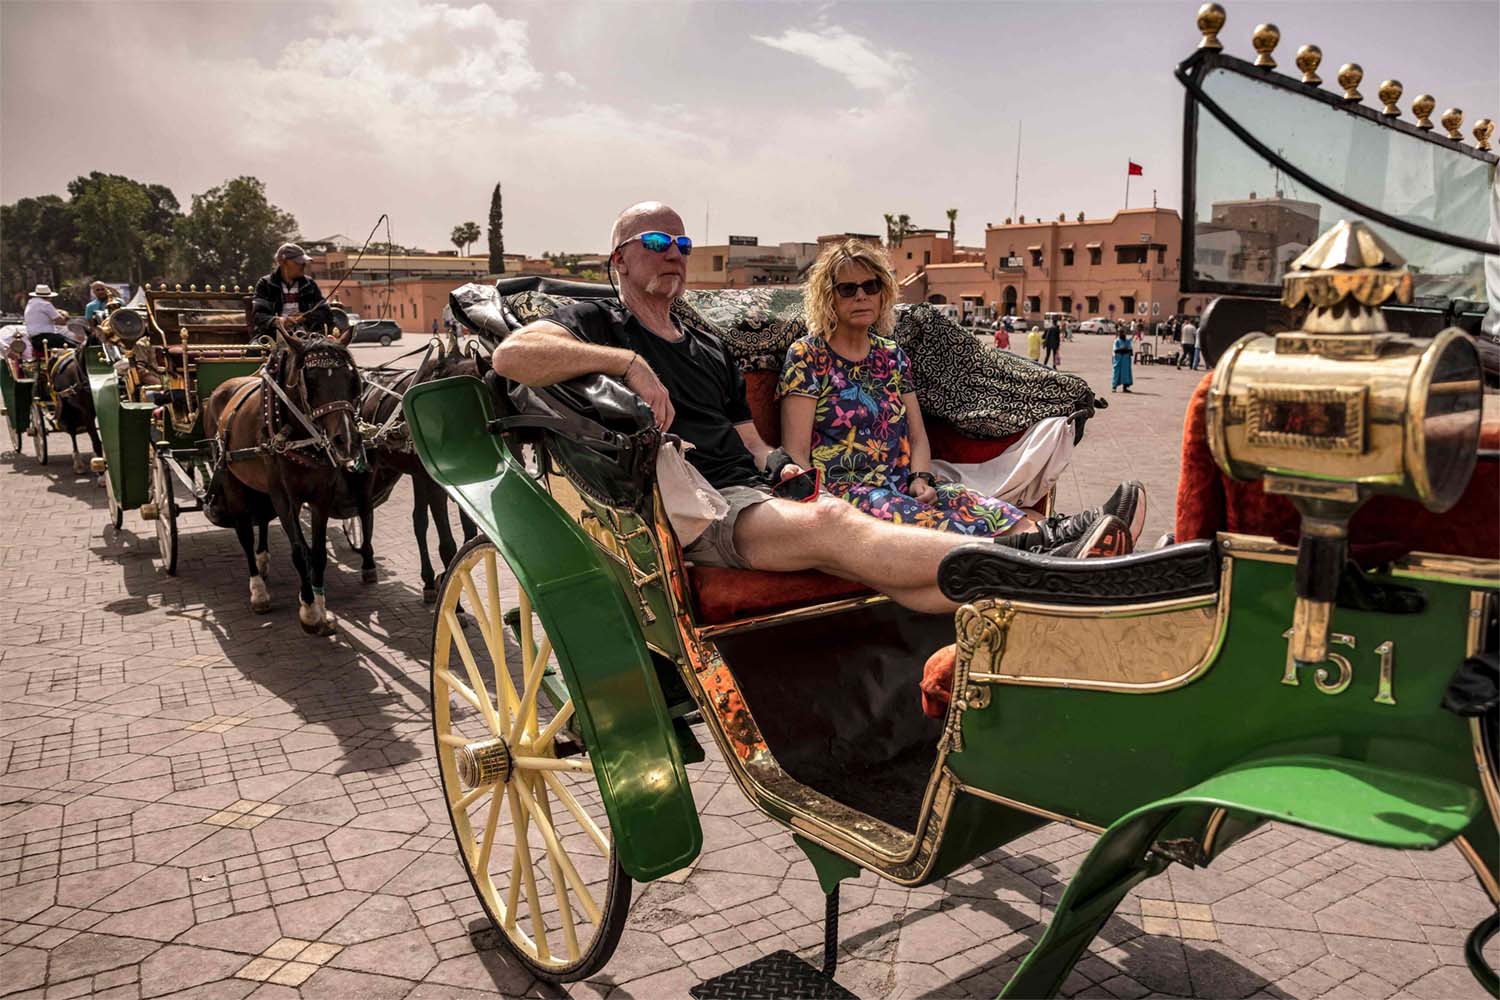 Morocco has managed to recover more than 76% of tourist arrivals after the COVID-19 pandemic